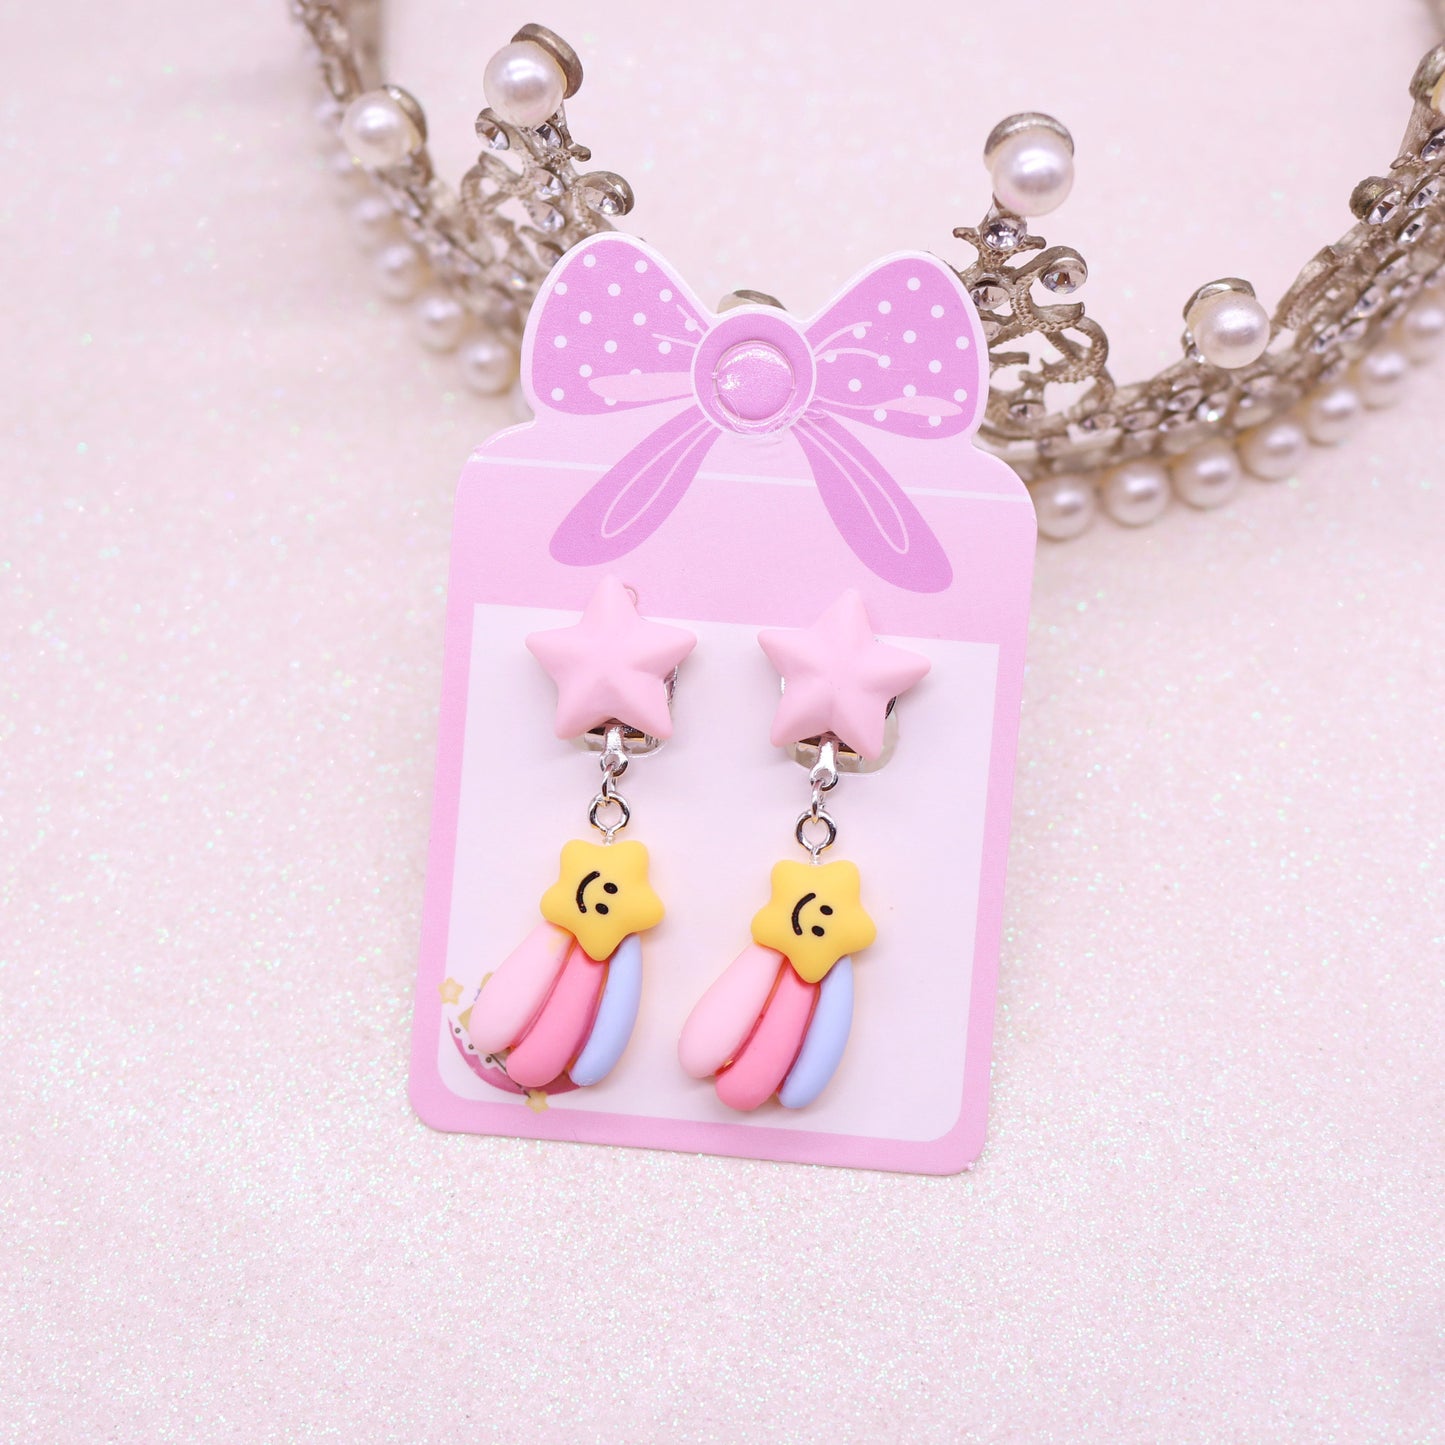 Kawaii Clip on Earrings with Surgical Steel Clip